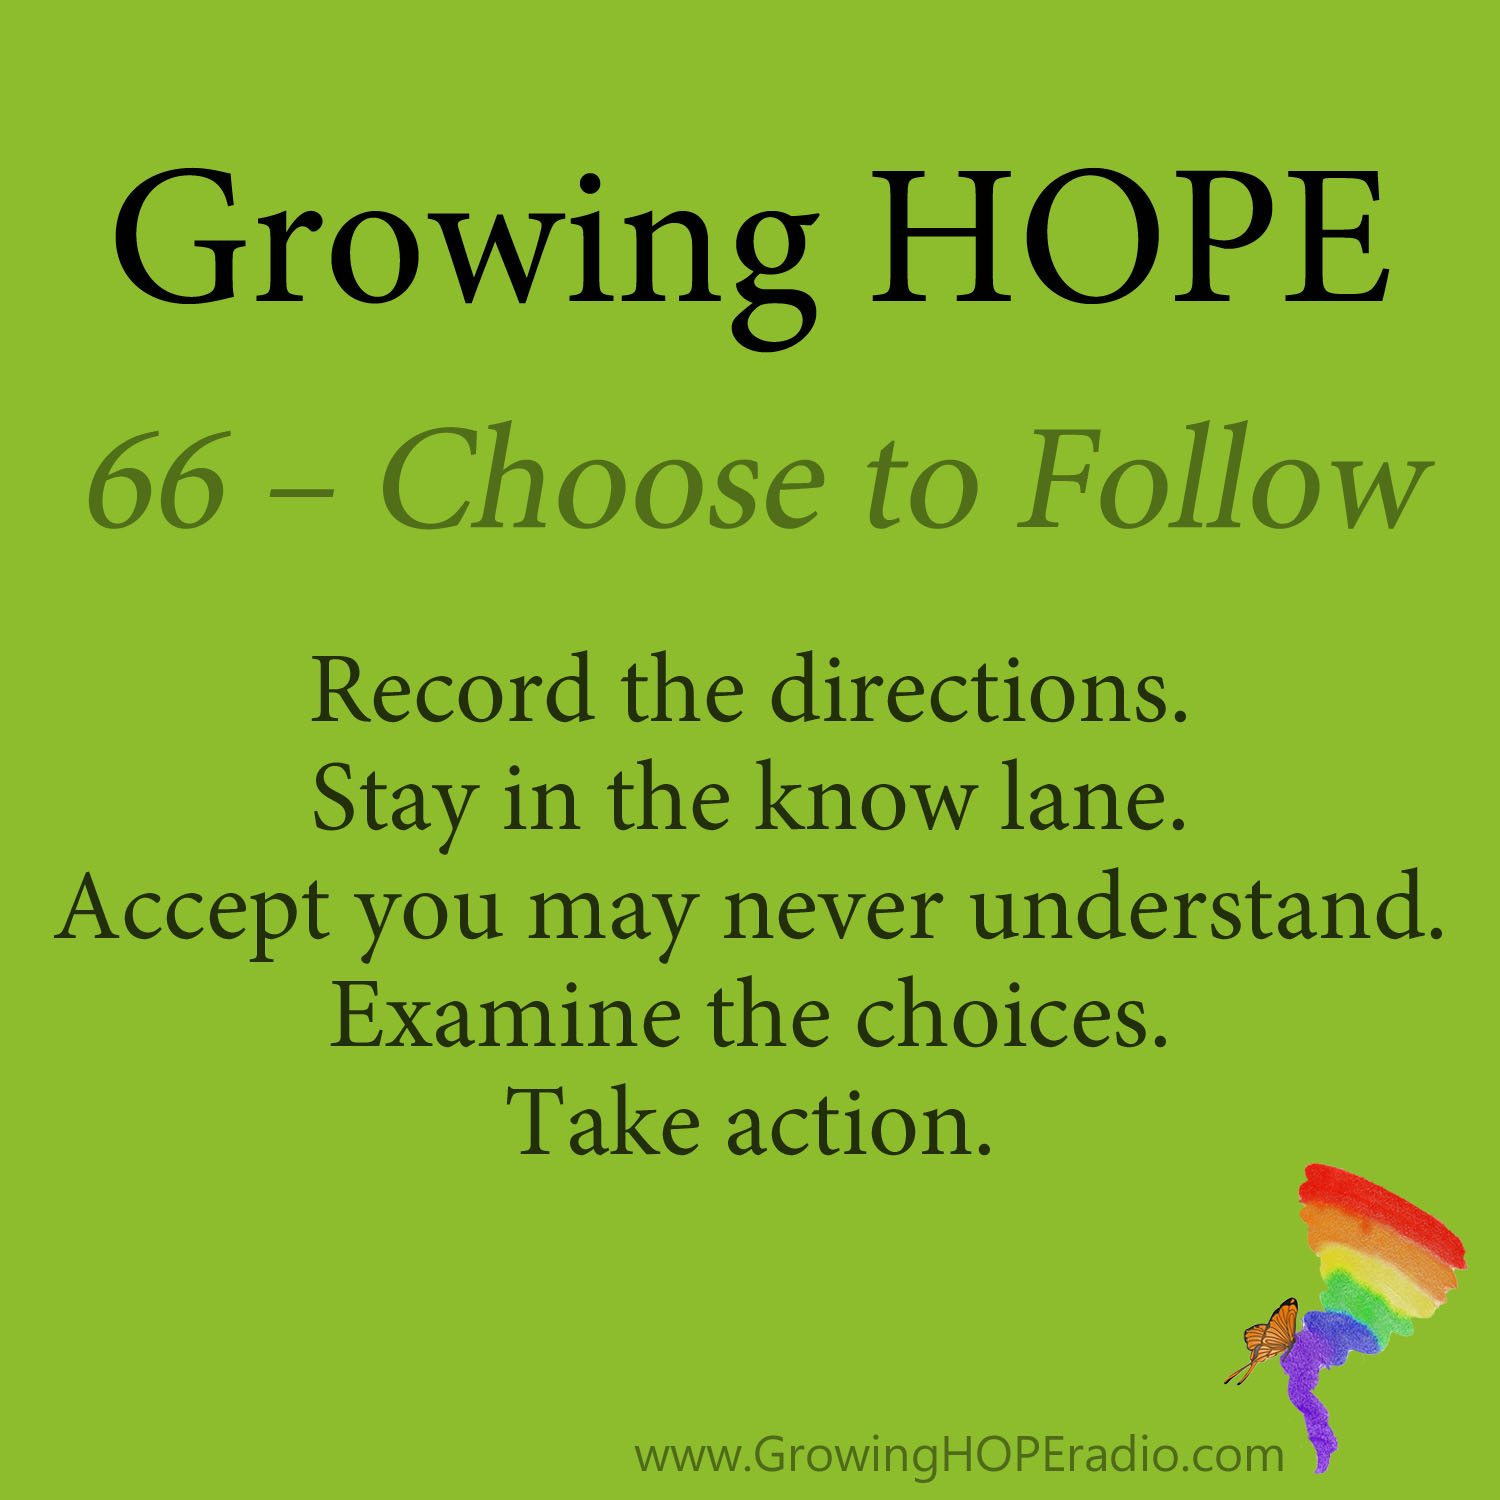 Growing HOPE Daily - 5 Points - Choose to Follow